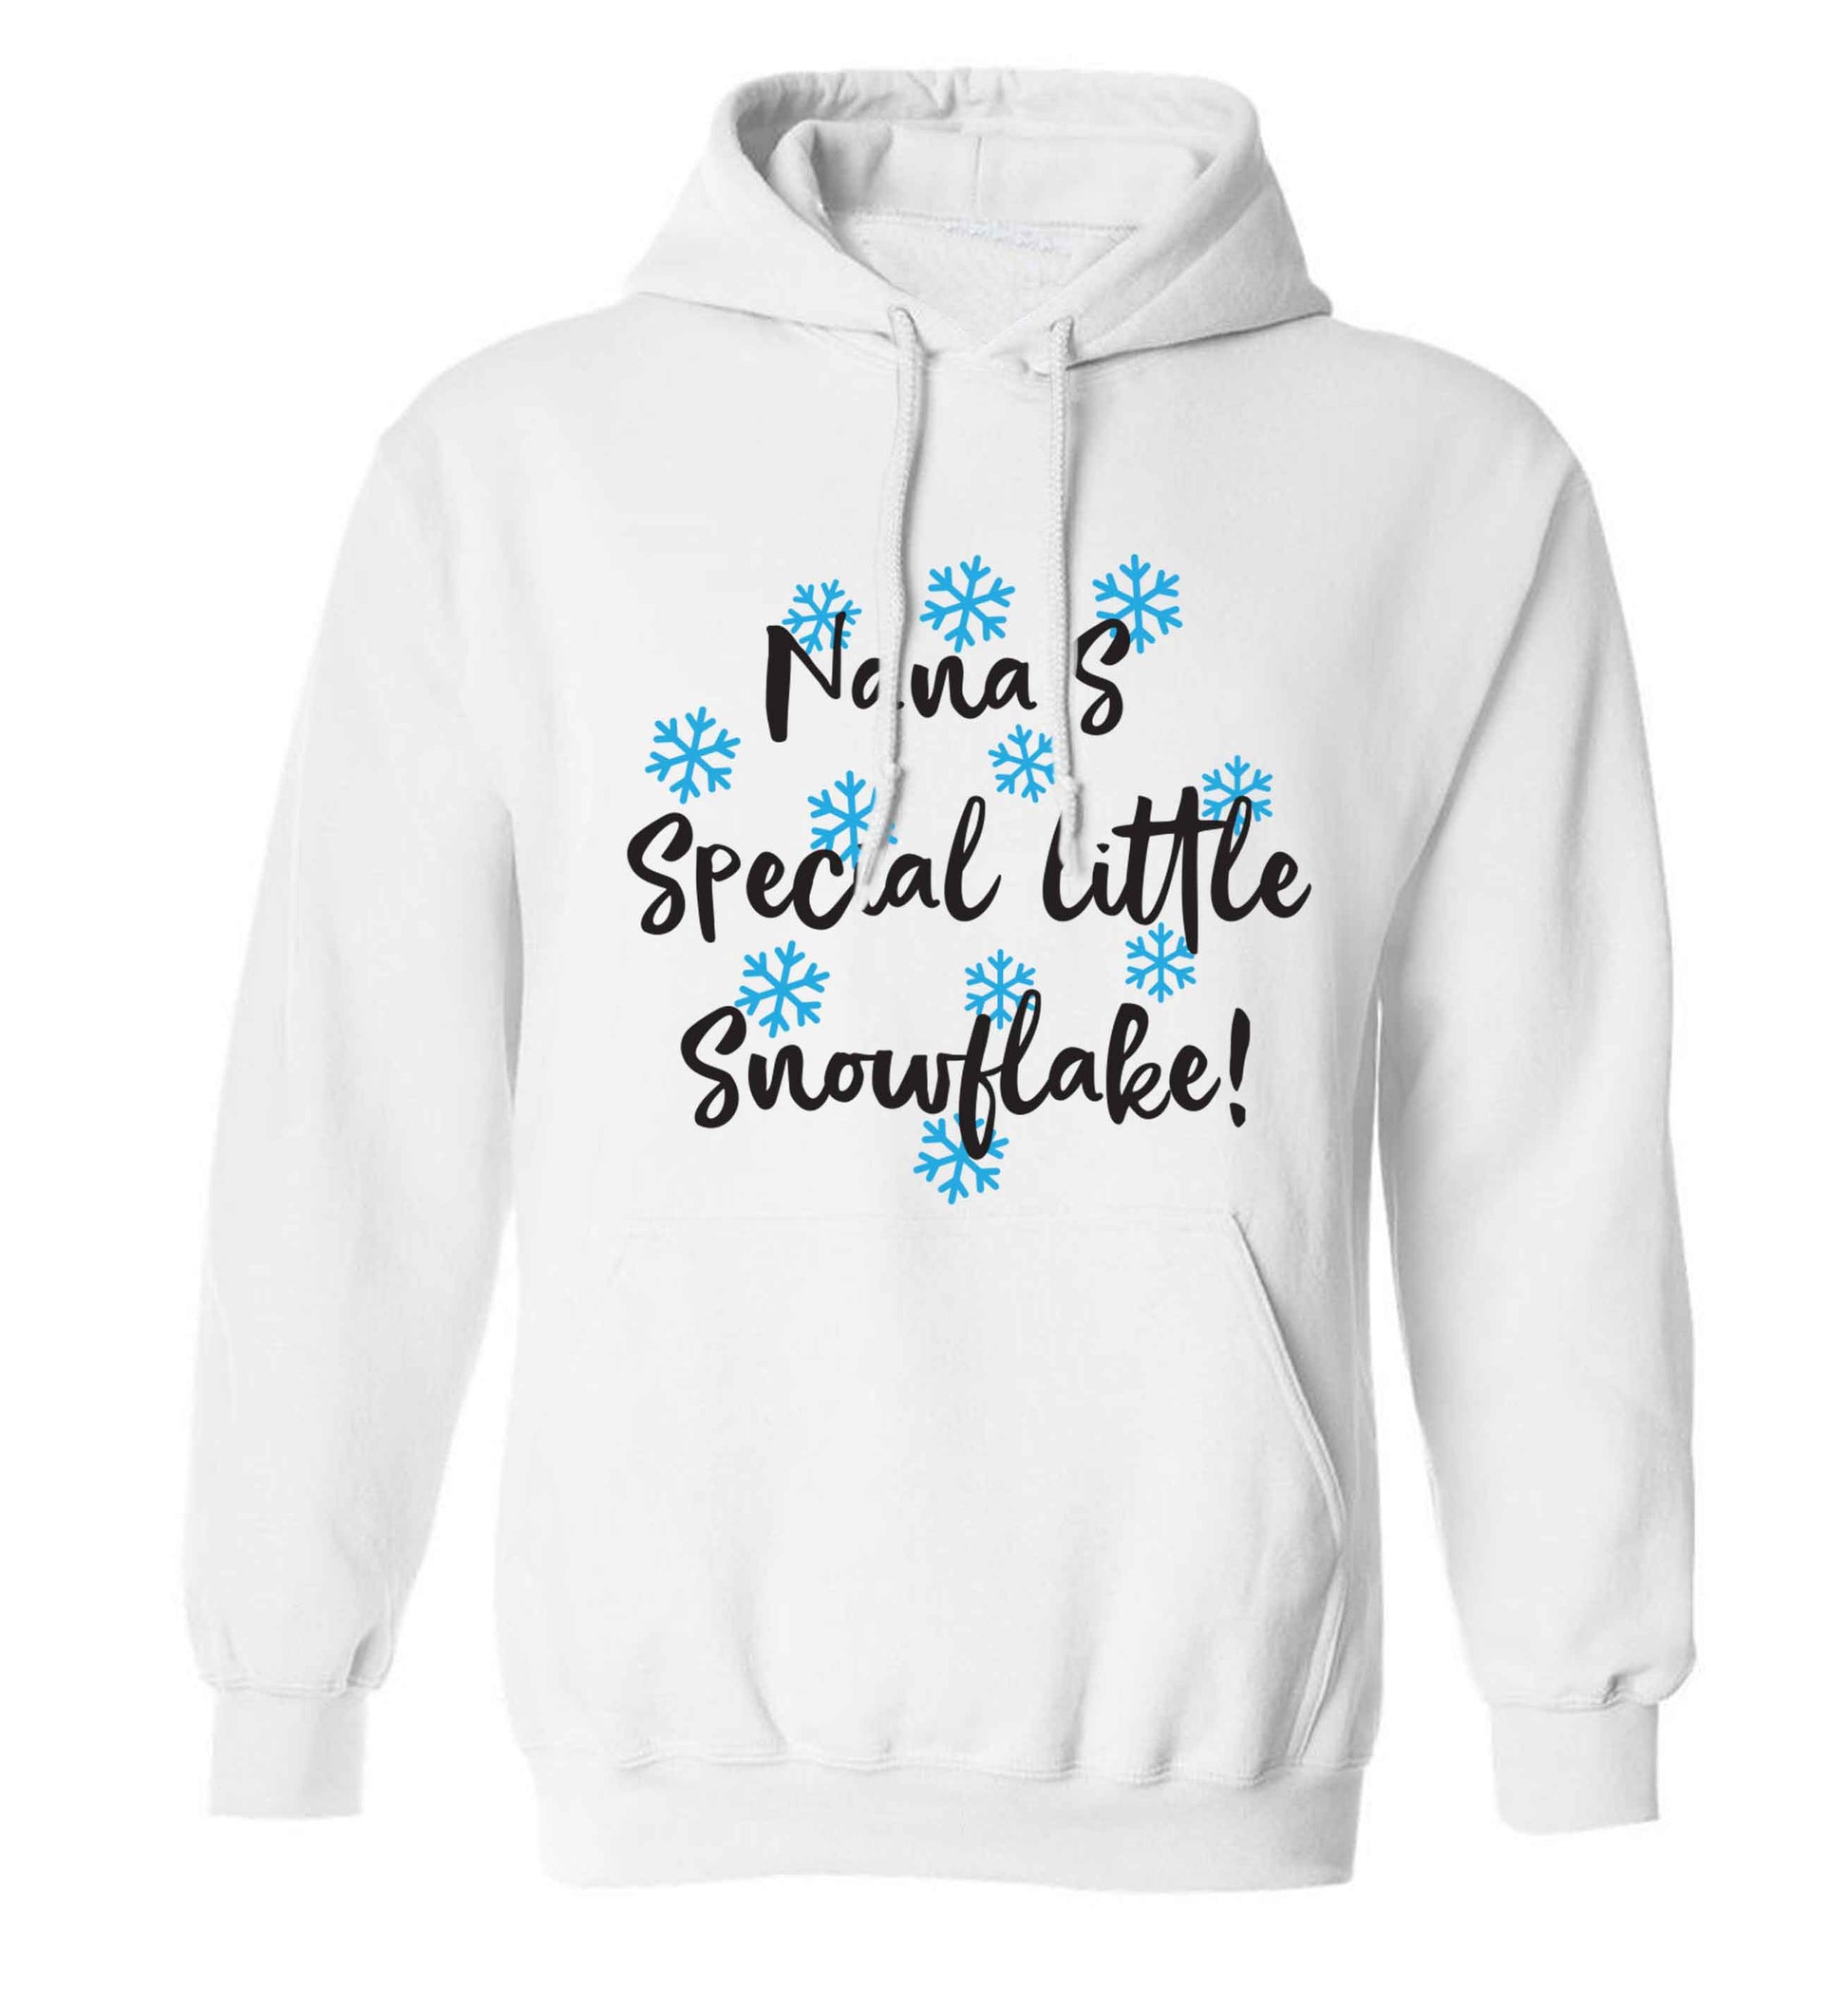 Nana's special little snowflake adults unisex white hoodie 2XL